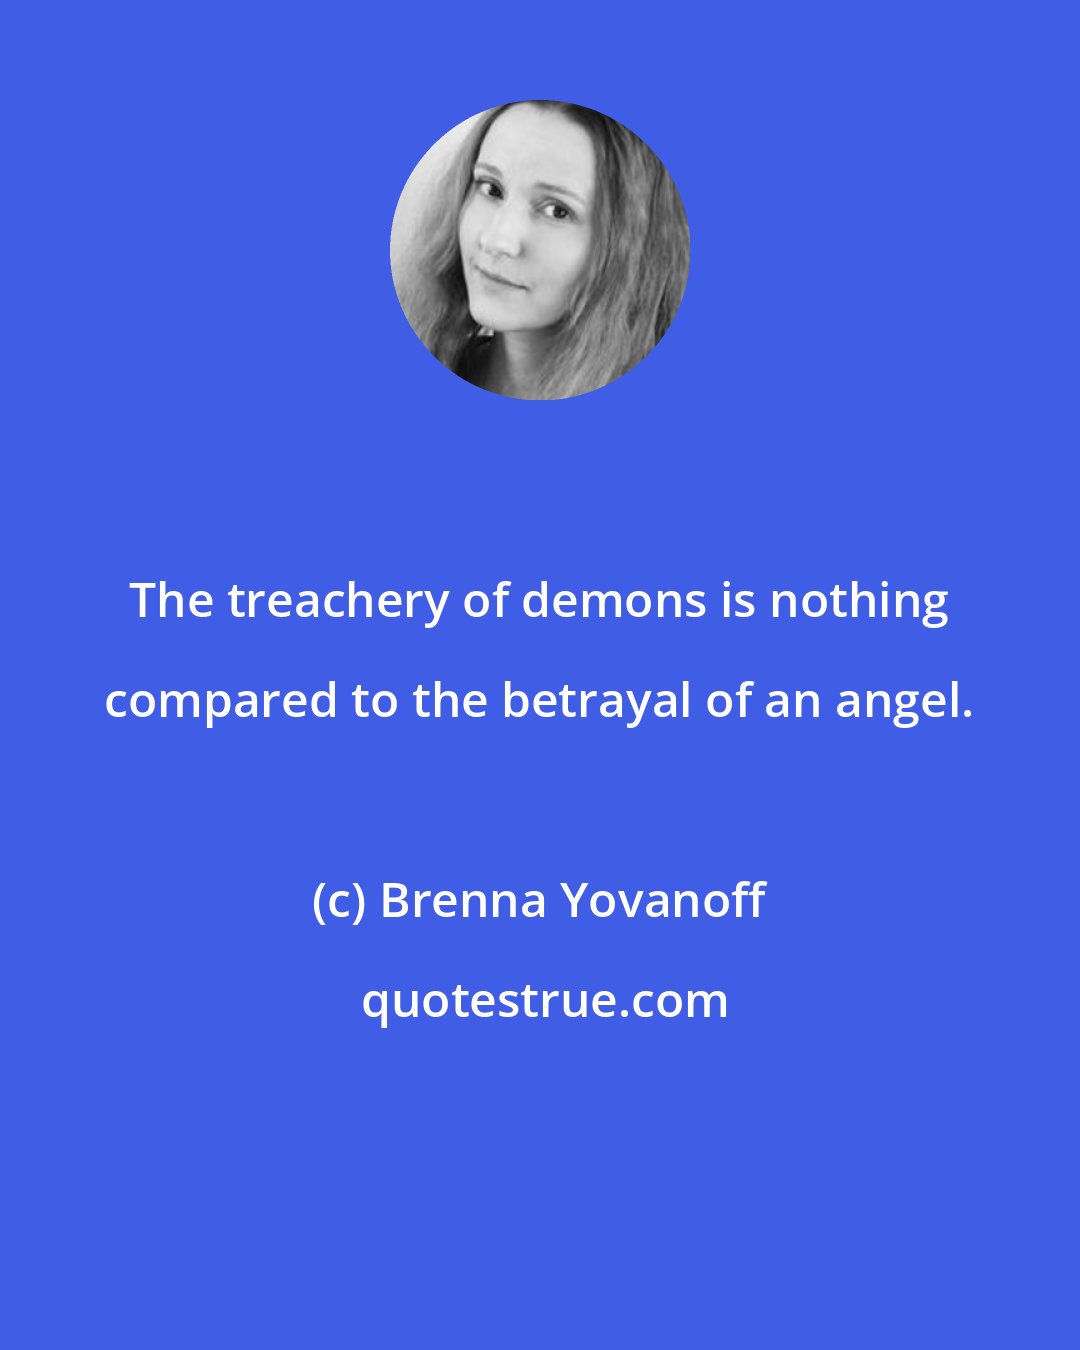 Brenna Yovanoff: The treachery of demons is nothing compared to the betrayal of an angel.